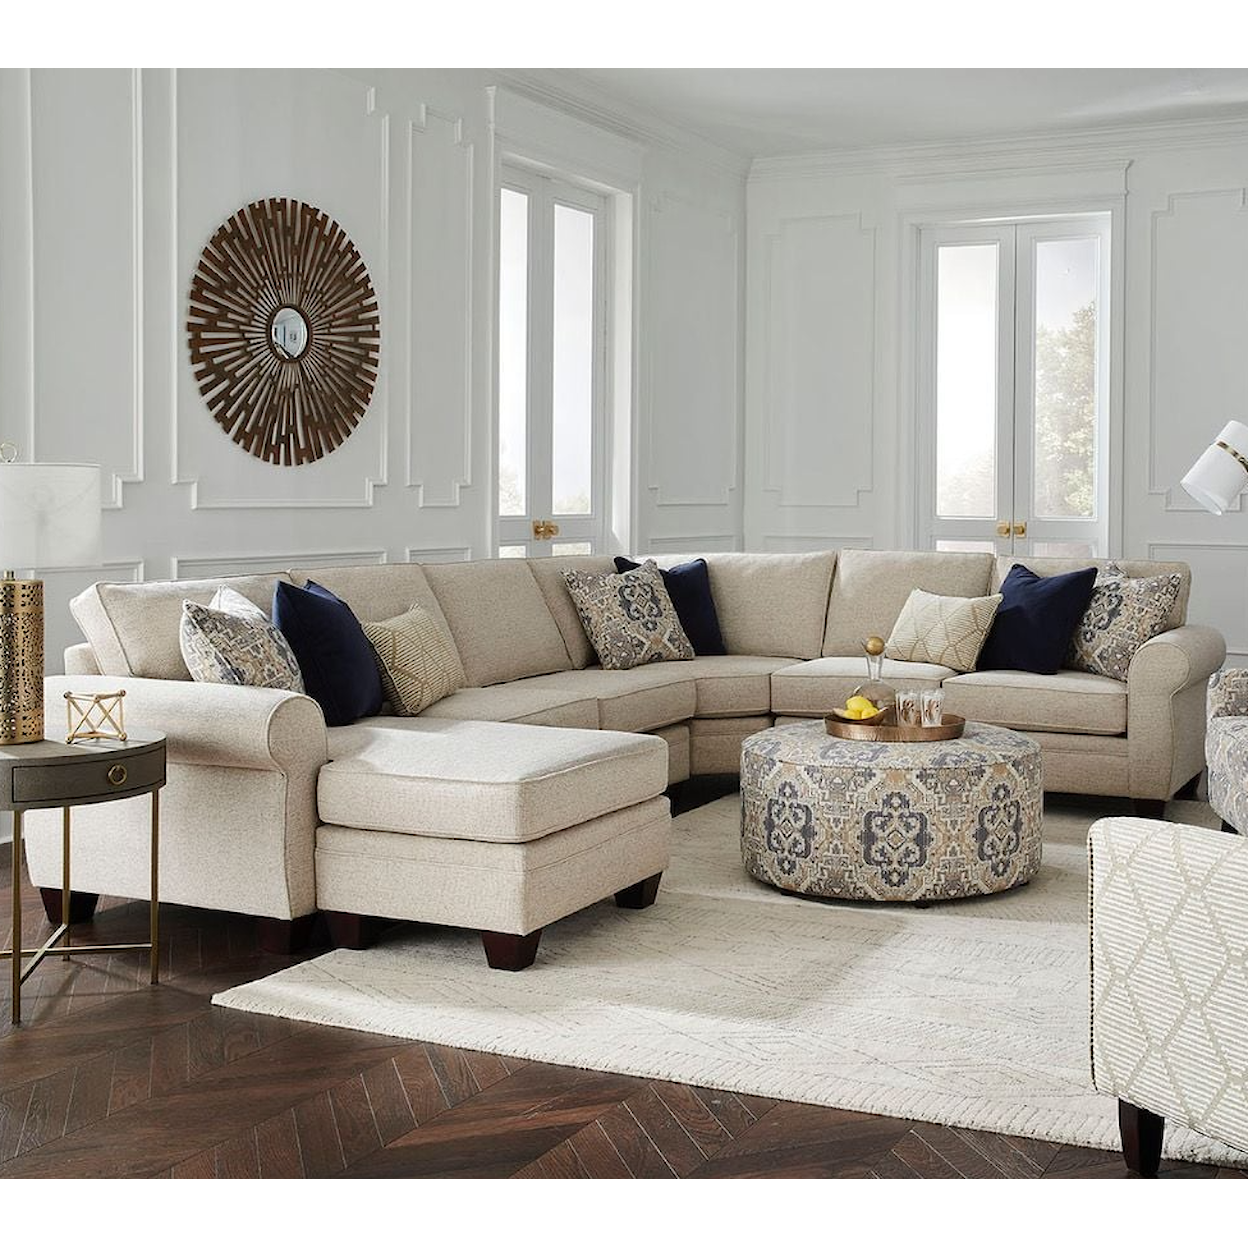 VFM Signature 1170 PLUMLEY BISQUE Sectional with Left Chaise